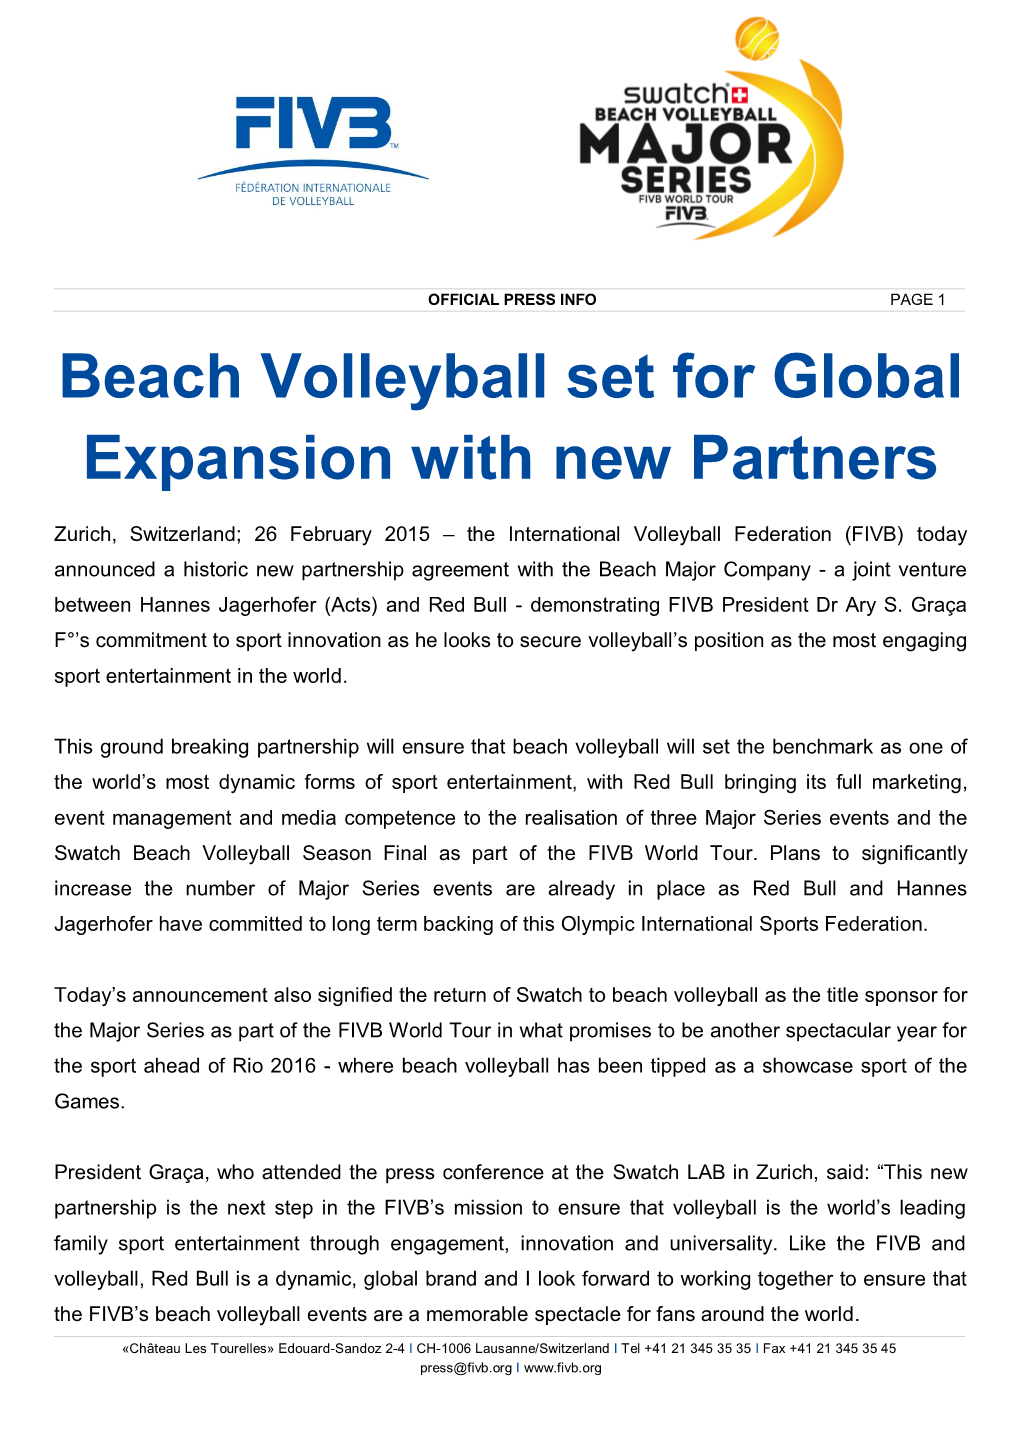 Beach Volleyball Set for Global Expansion with New Partners